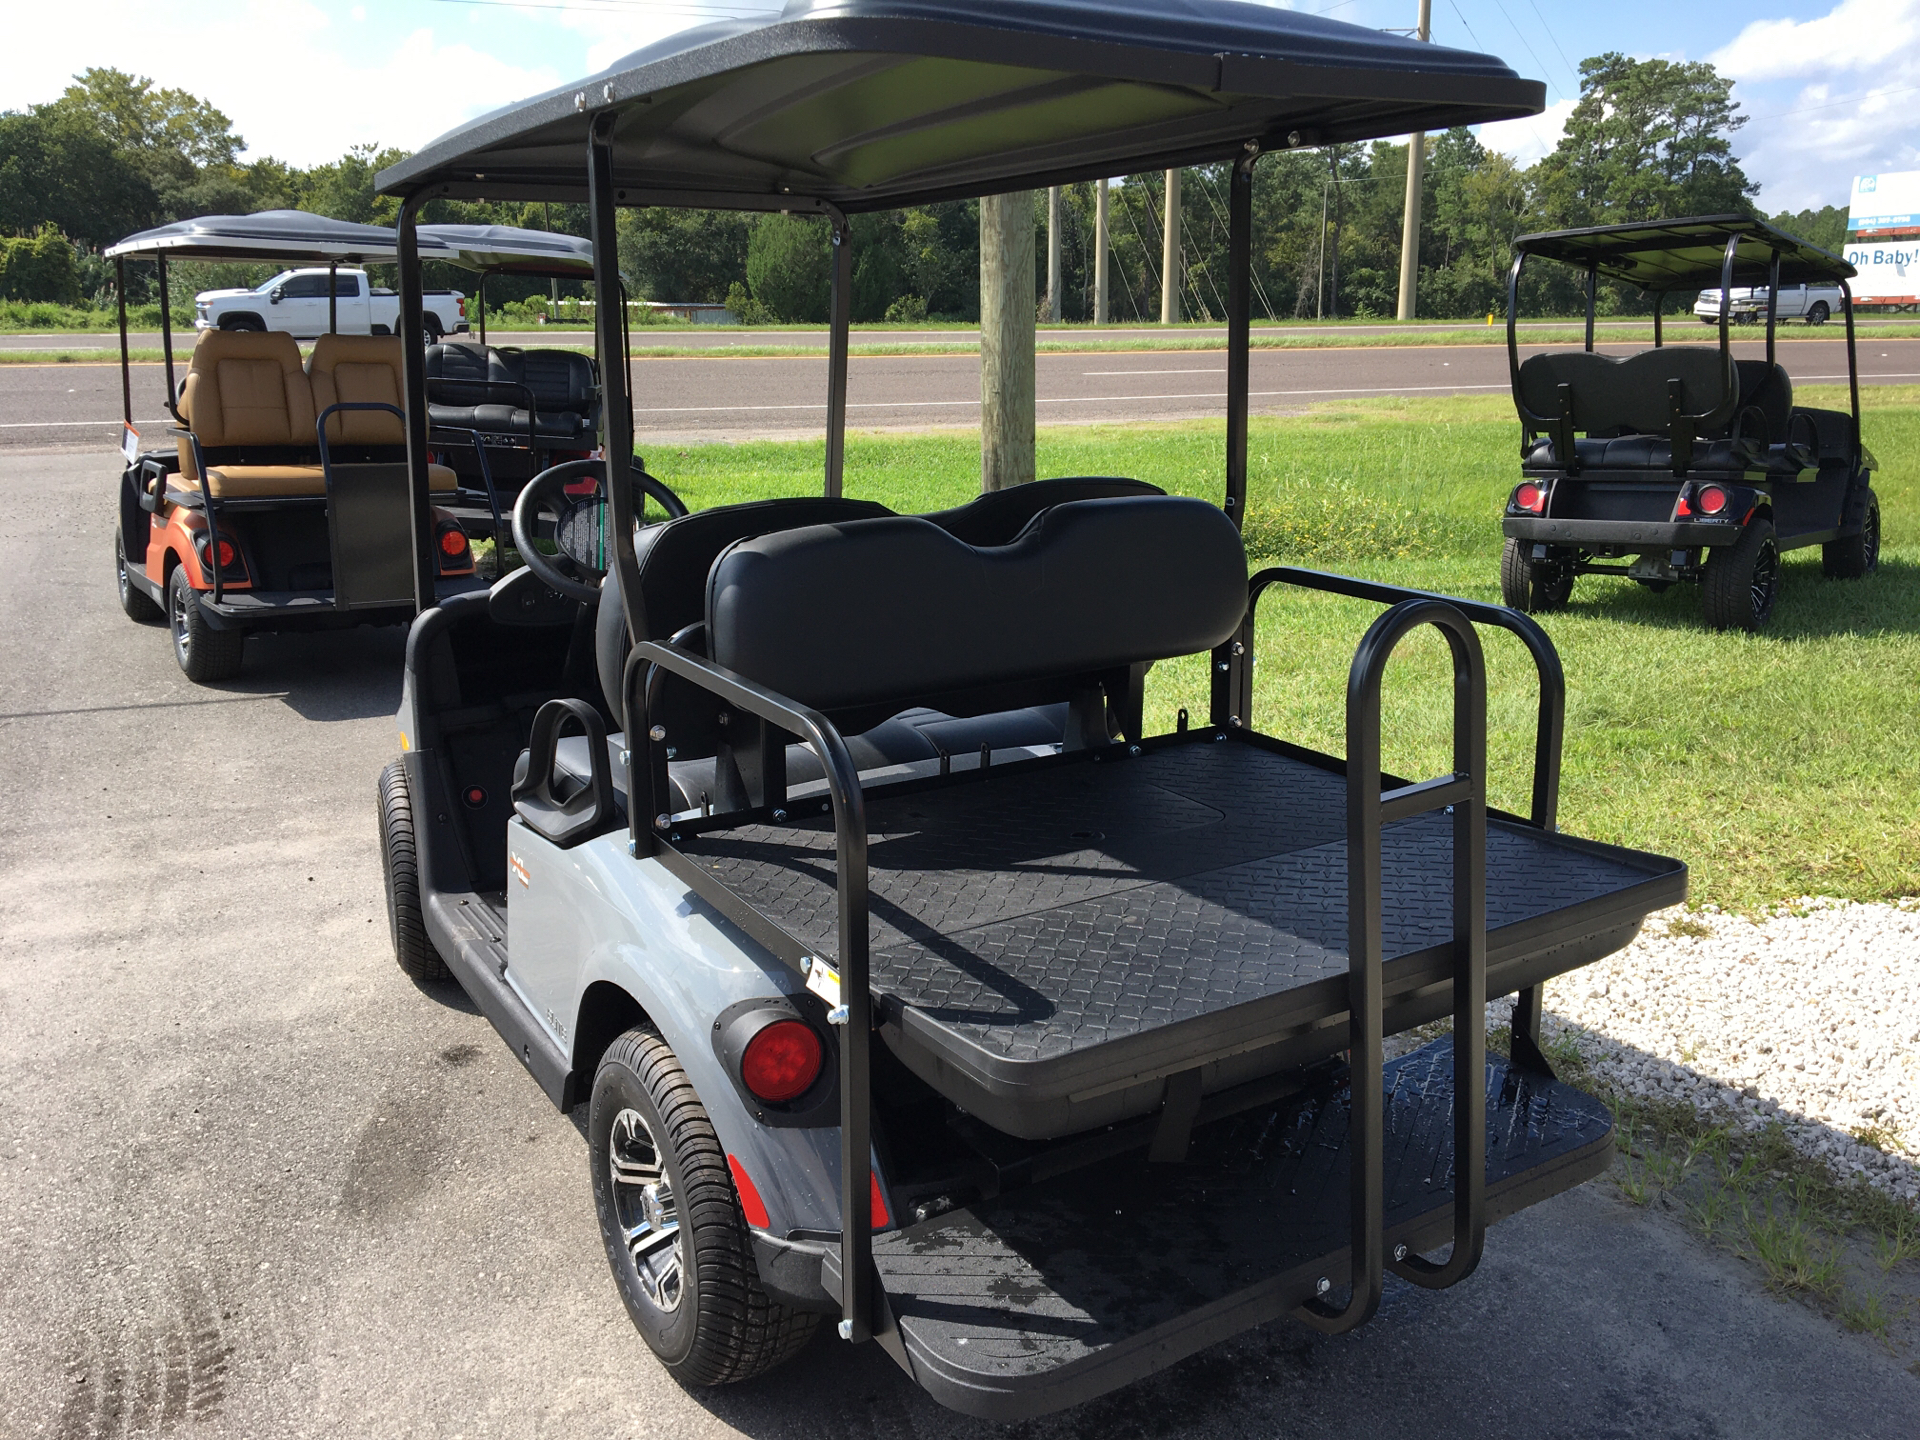 2023 E-Z-GO Freedom RXV ELiTE 2.2 Single Pack with Light World Charger in Fernandina Beach, Florida - Photo 4